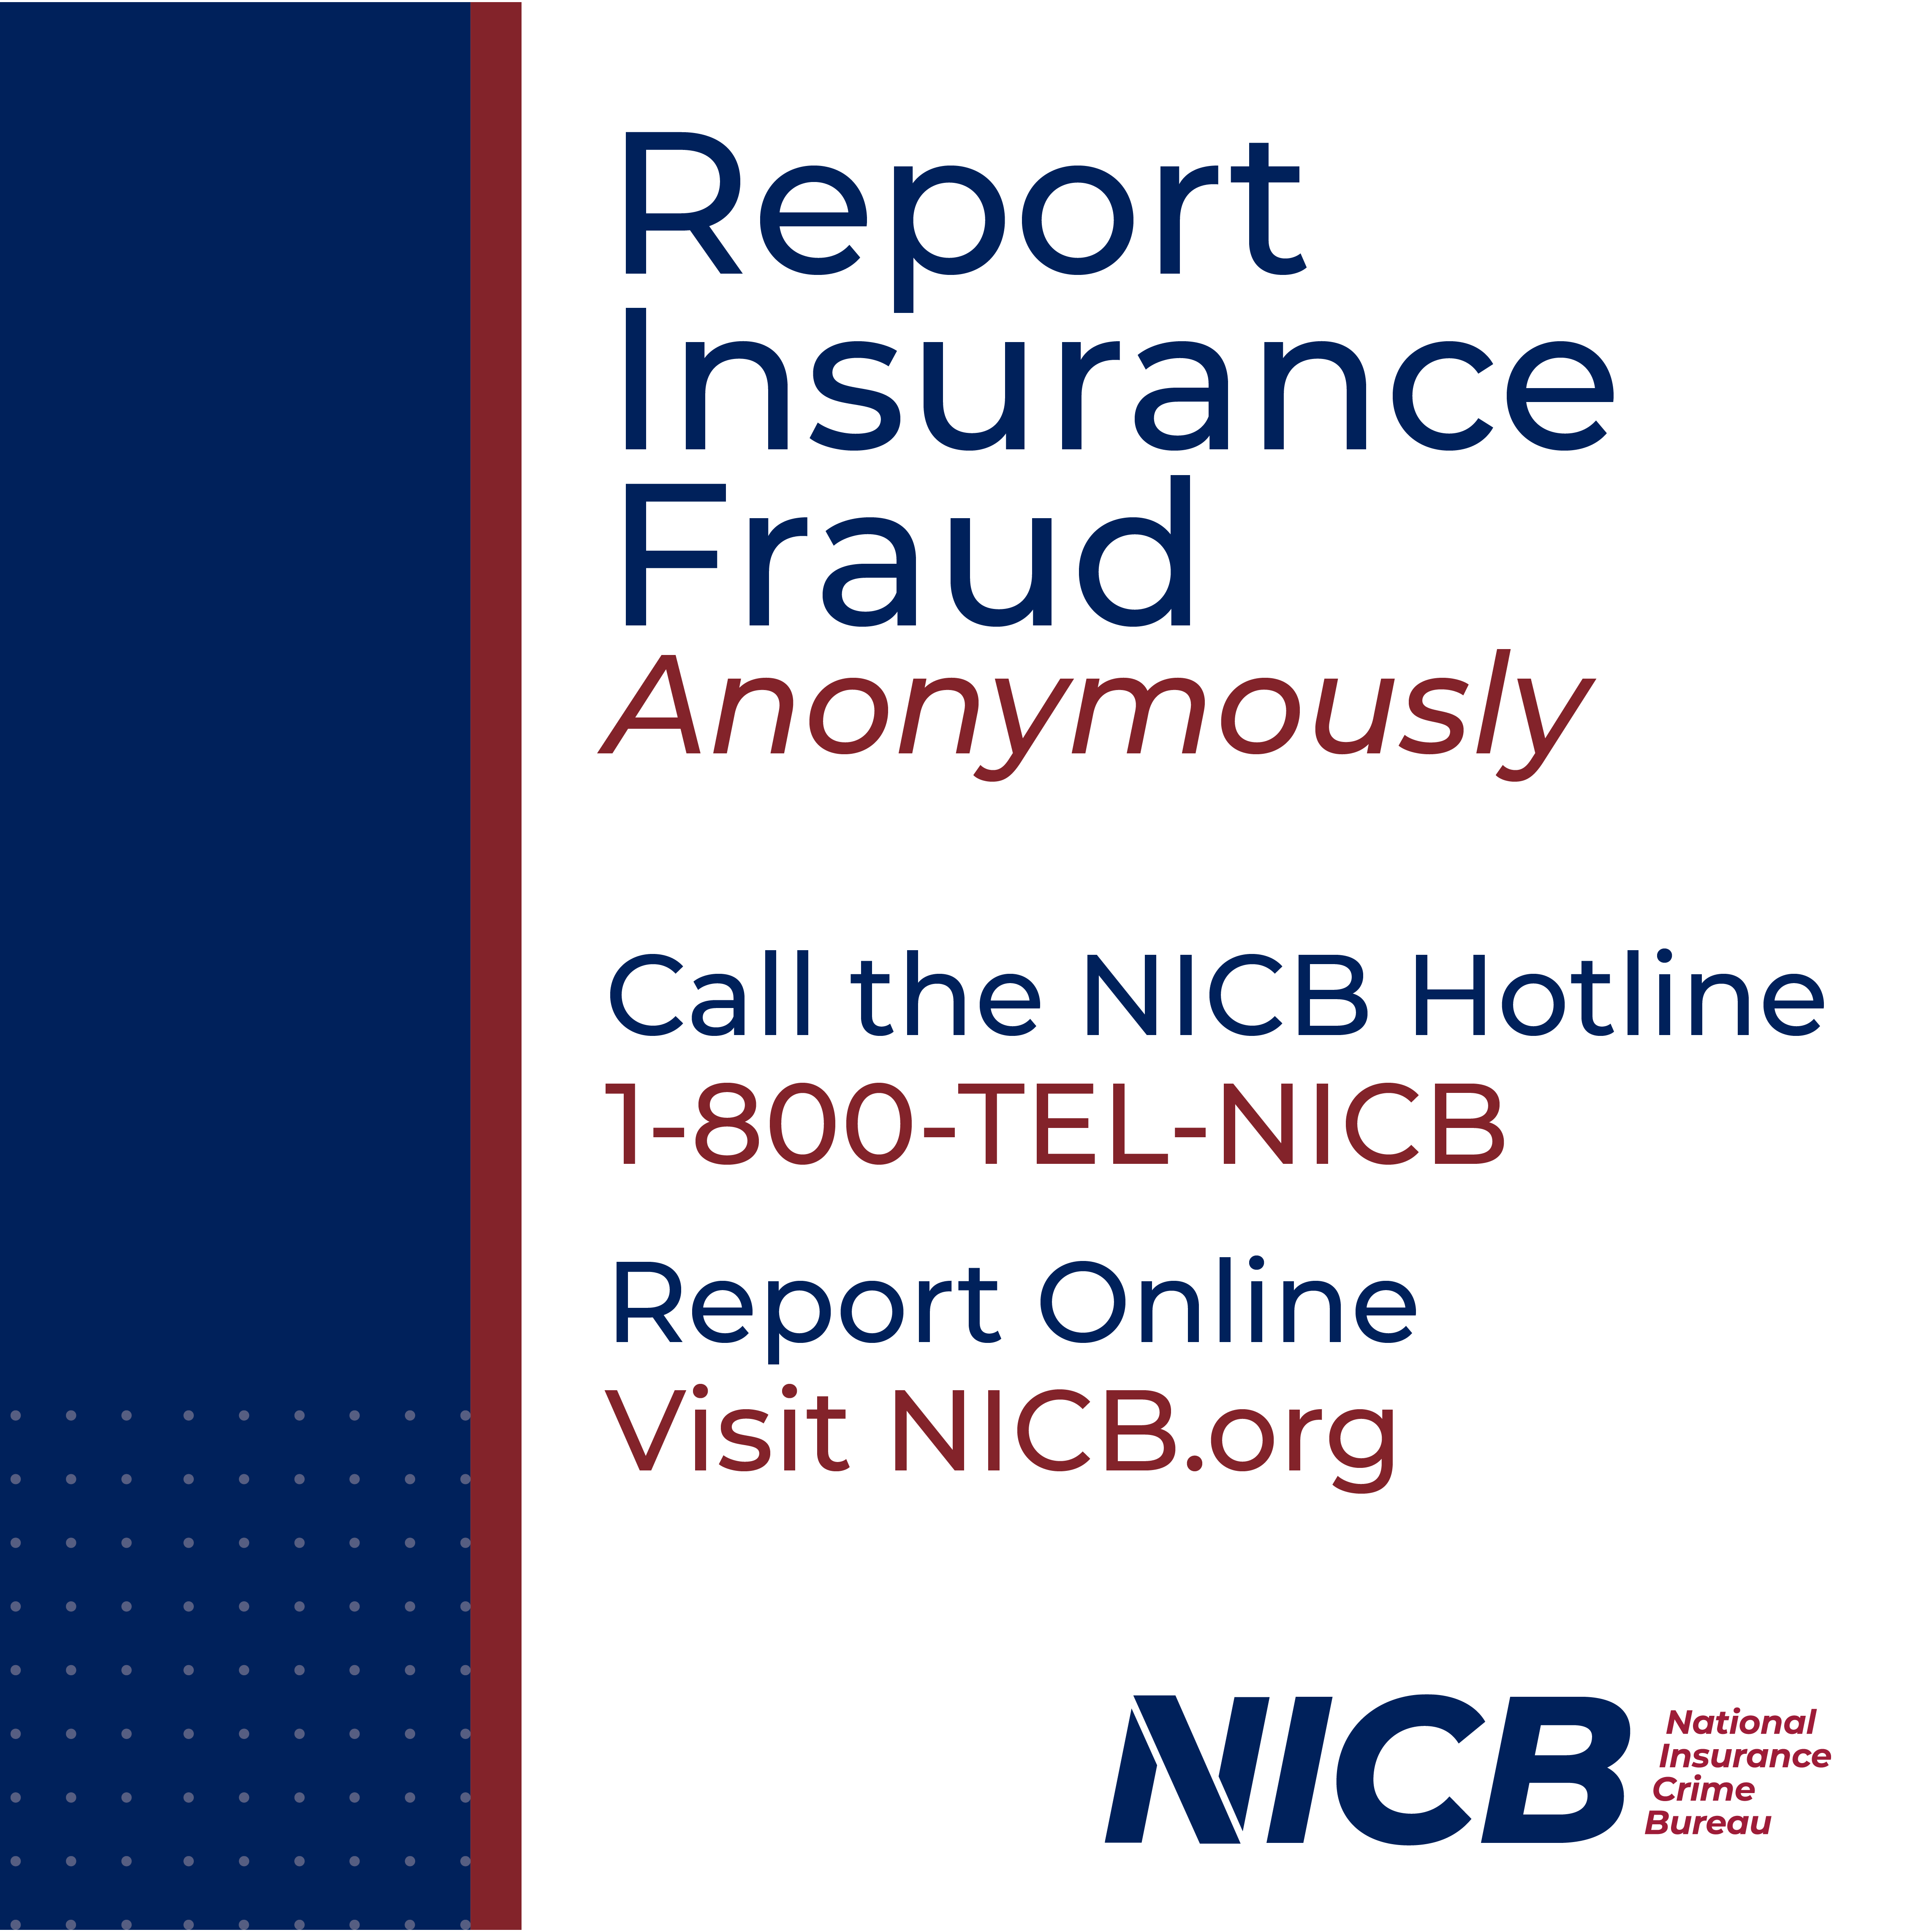 Report Insurance Fraud Anonymously. Call the NICB Hotline 1-800-TEL-NICB. Report Online Visit NICB.org